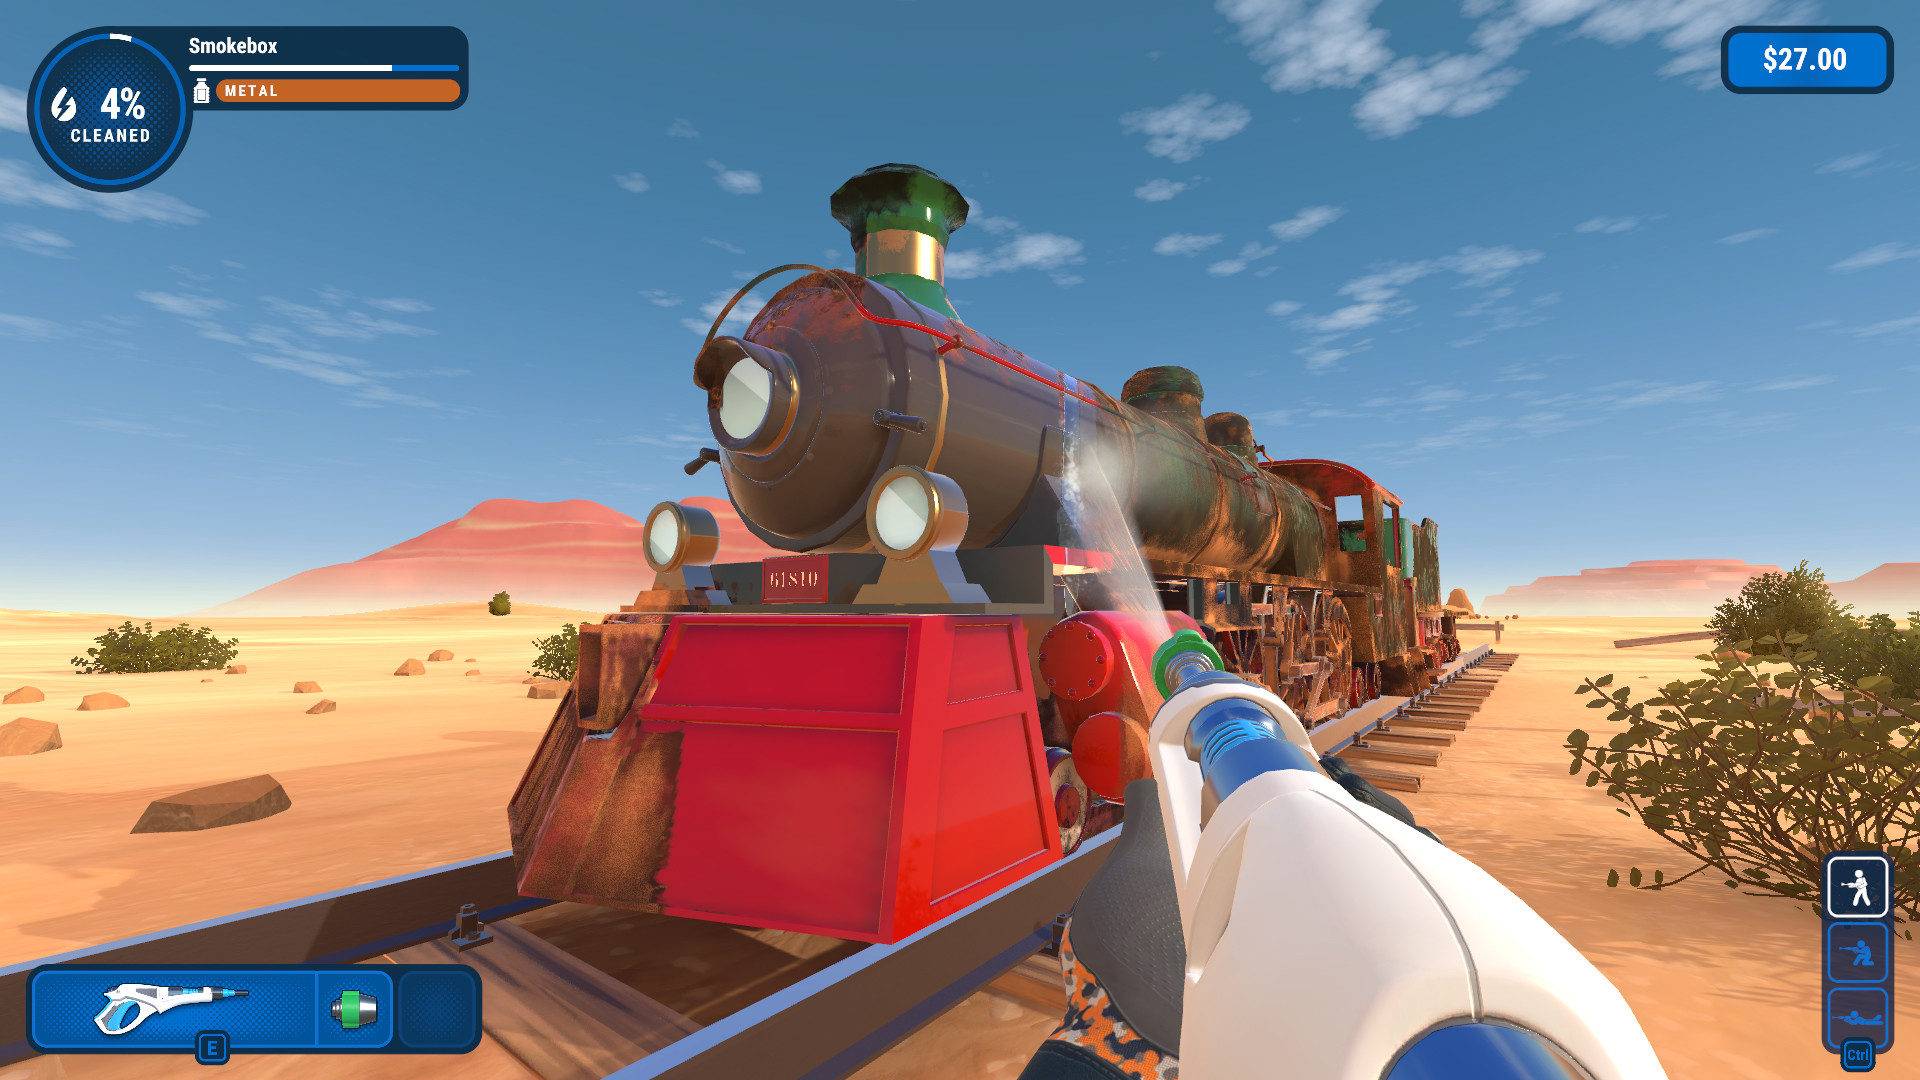 Best 2 player Xbox games: A person jet washes a train